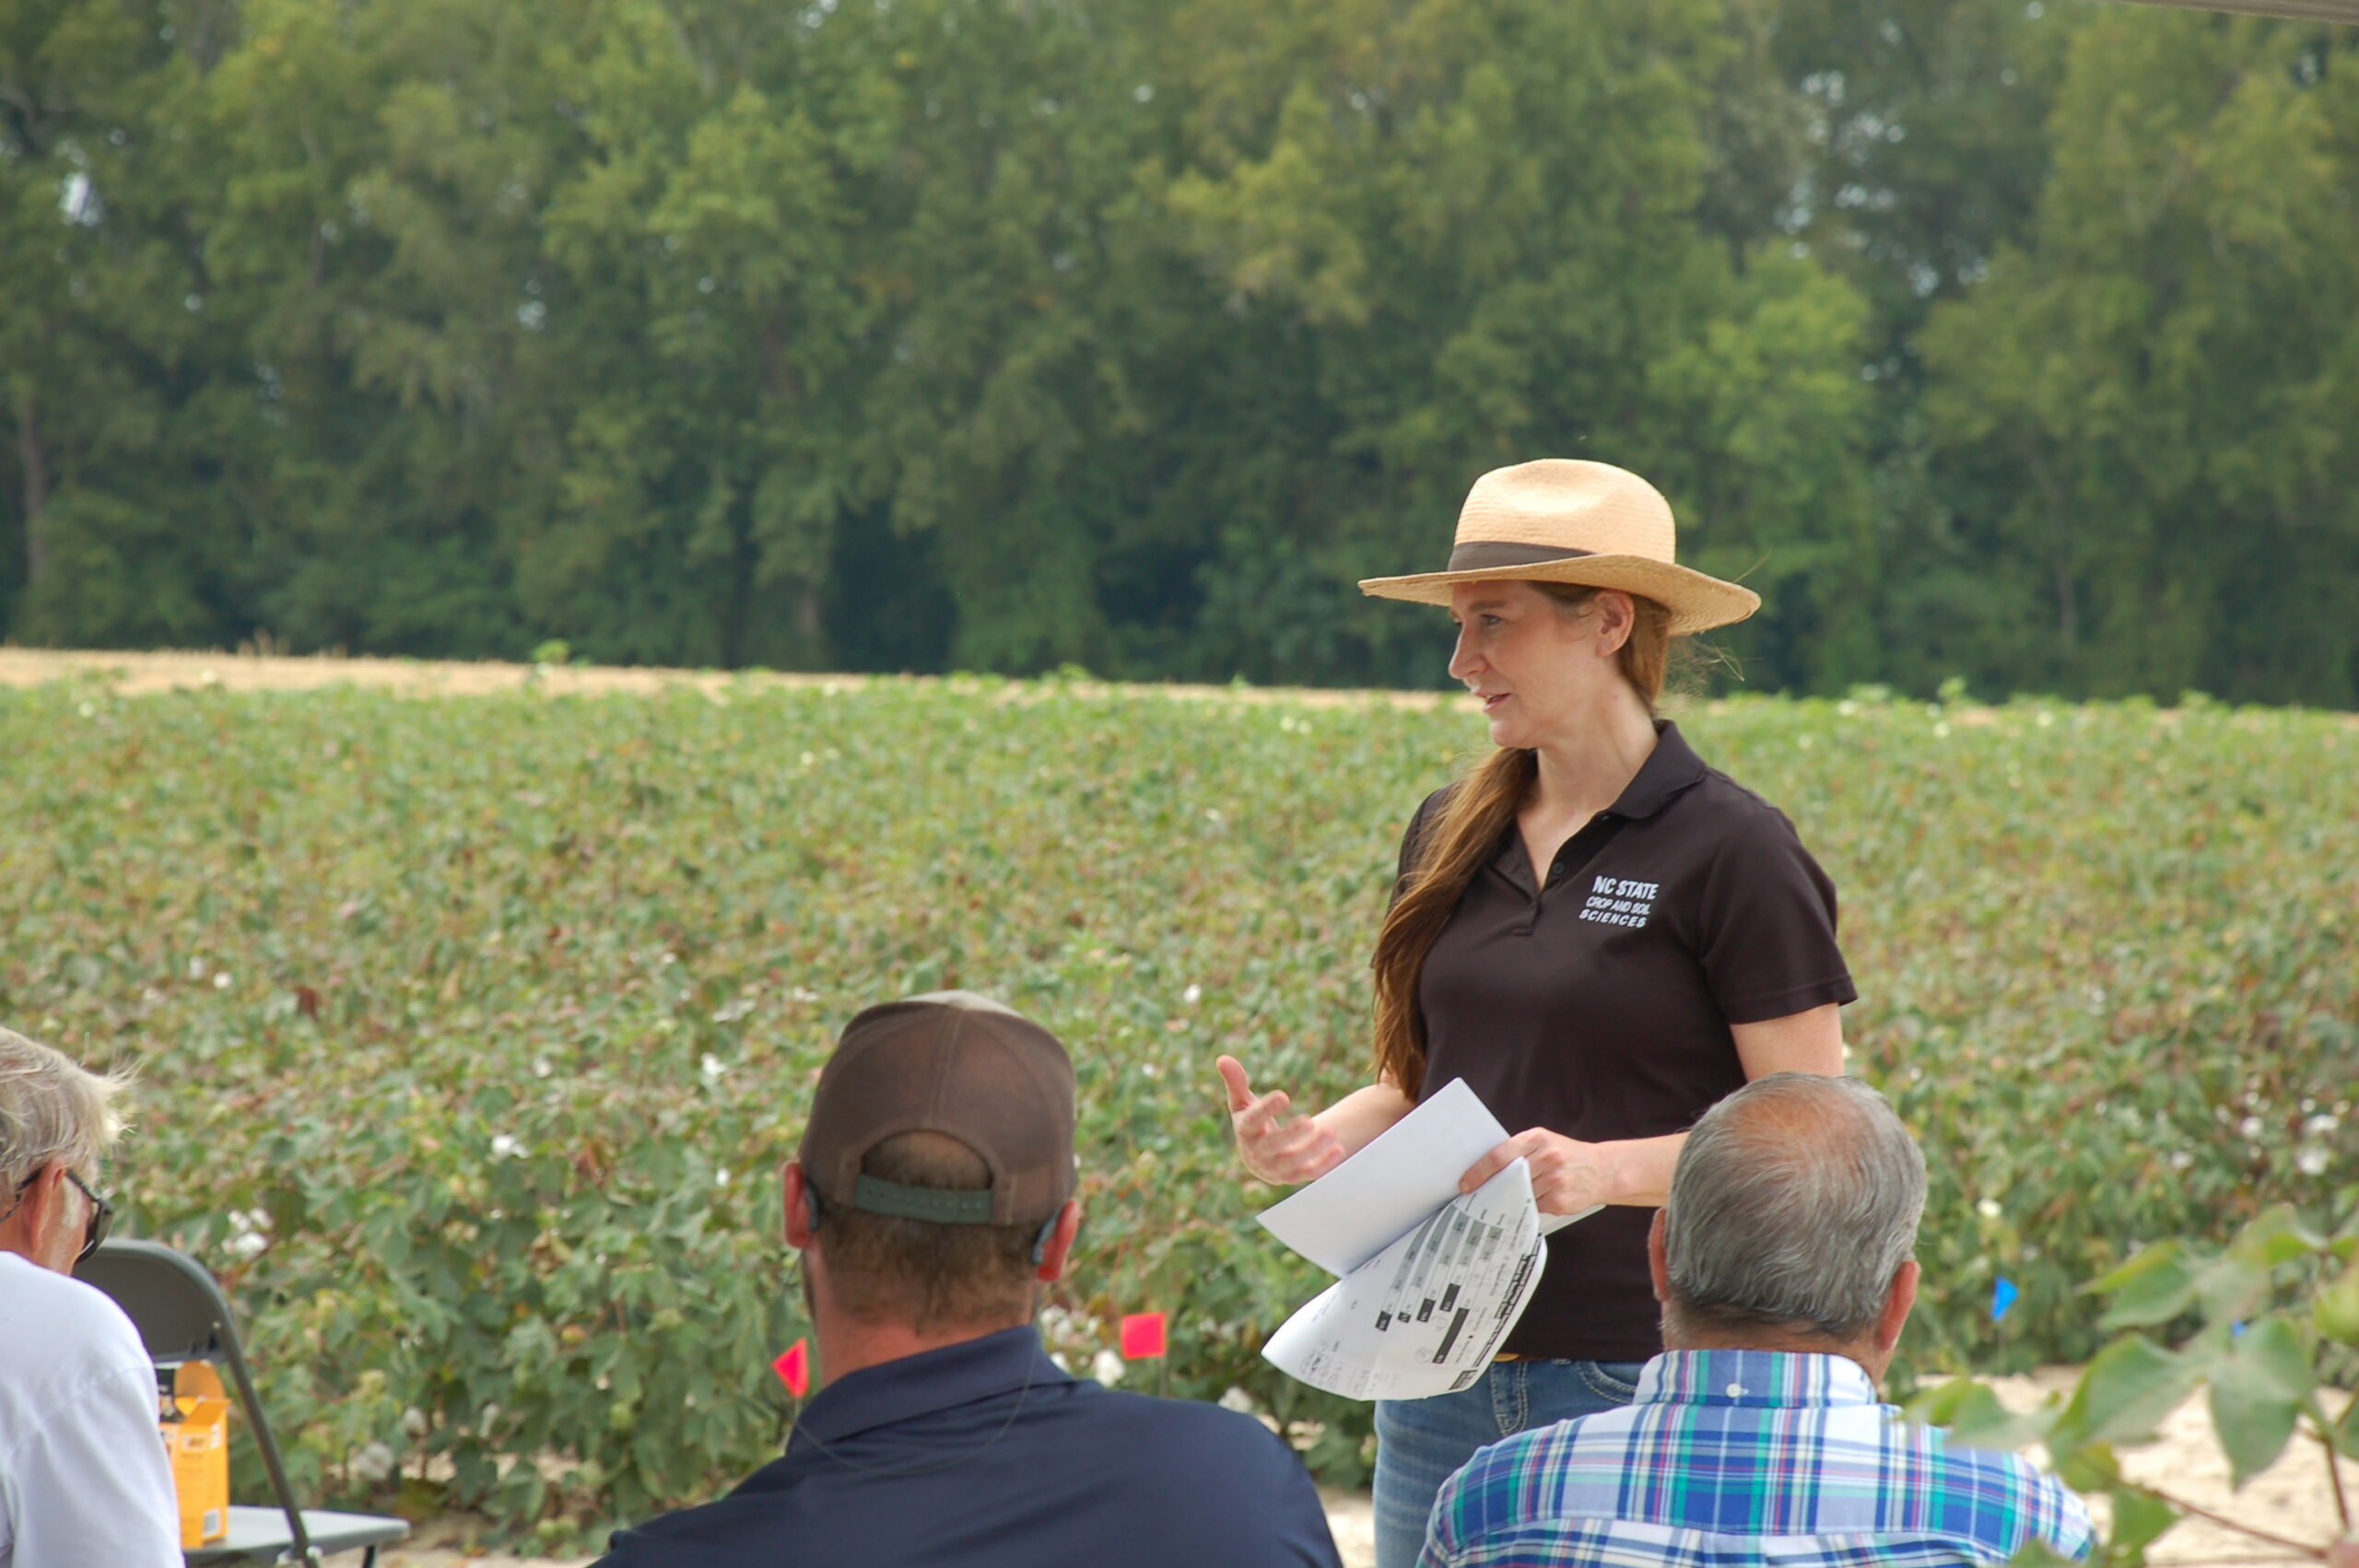 NC State's Lori Unruh-Snyder presents research at a cotton field day.